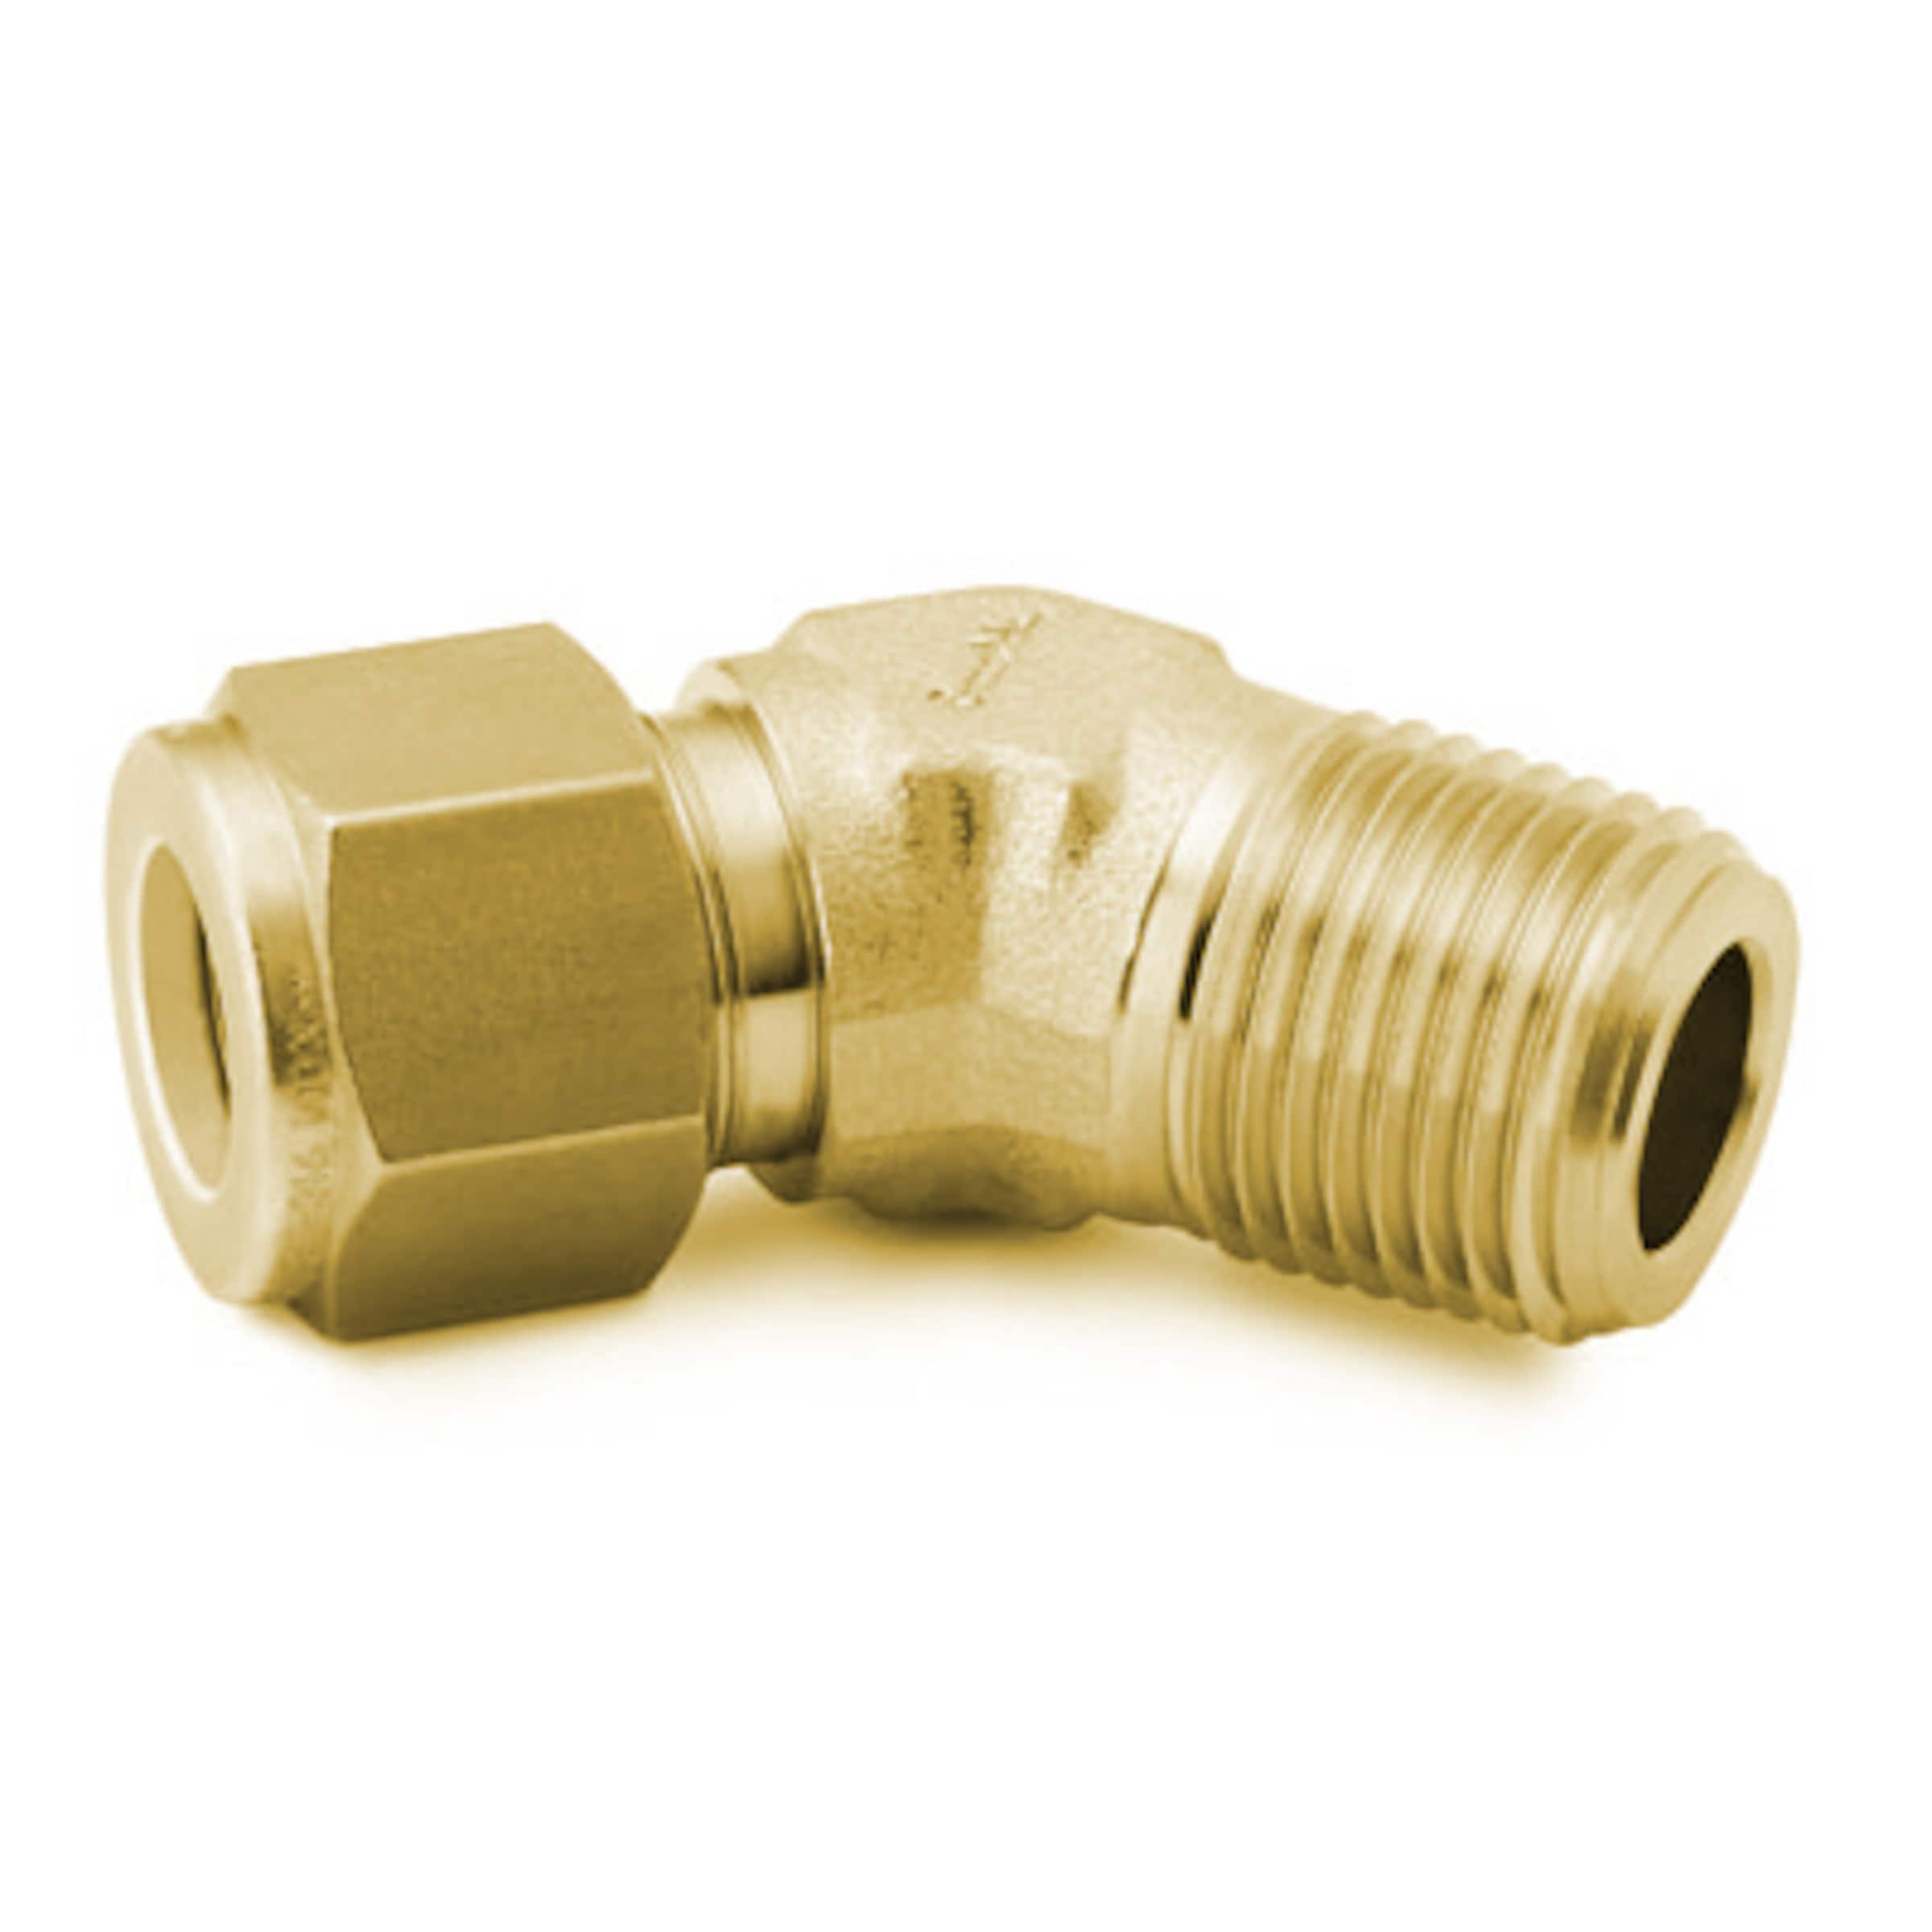 Brass Swagelok Tube Fitting, 45° Male Elbow, 1/4 in. Tube OD x 1/8 in. Male  NPT, Male Connectors, Tube Fittings and Adapters, Fittings, All  Products